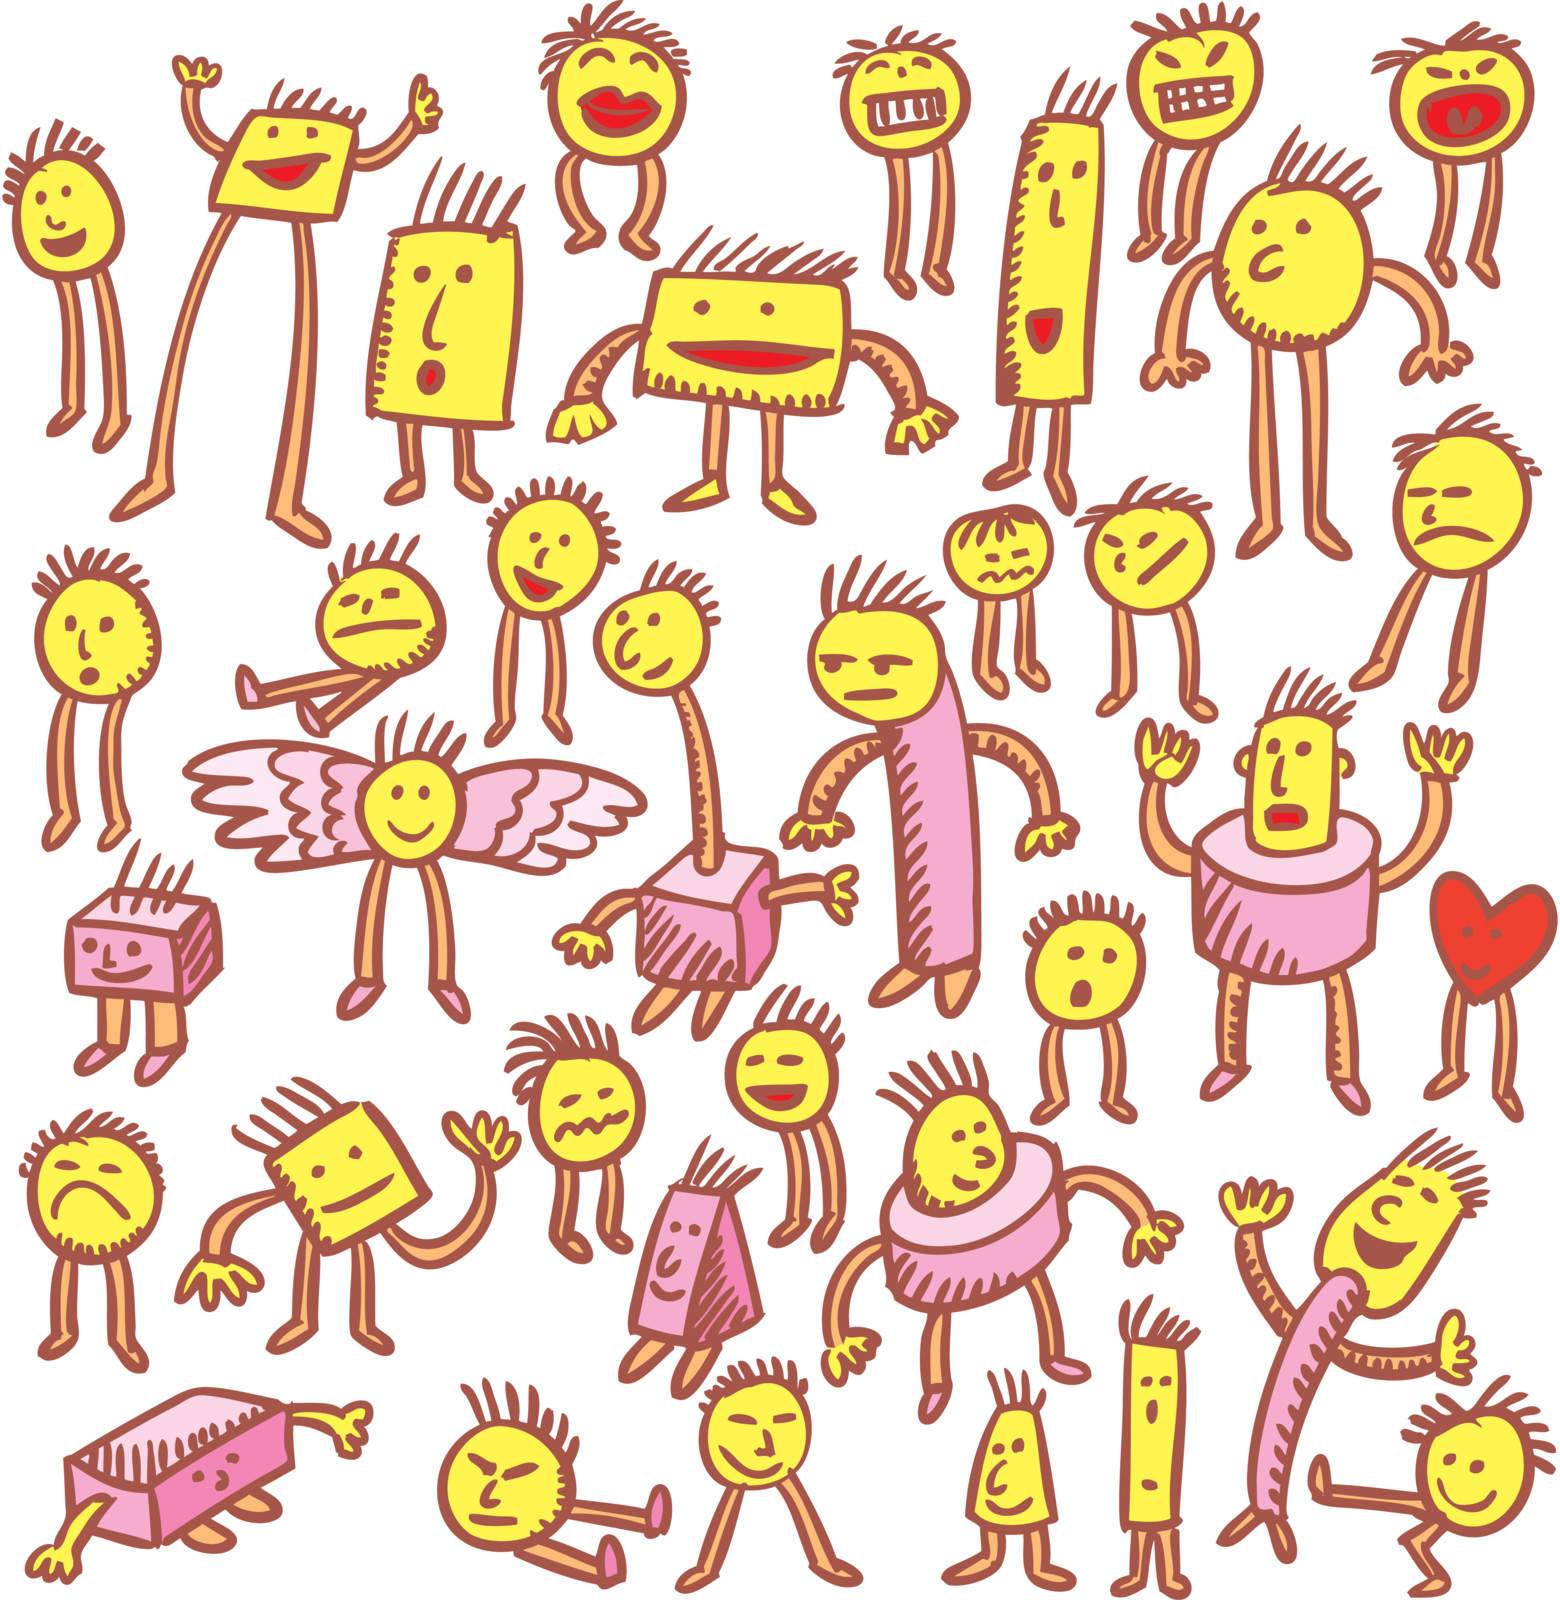 Various characters hand drawn in emoticons style.
Each character stand in his layer.